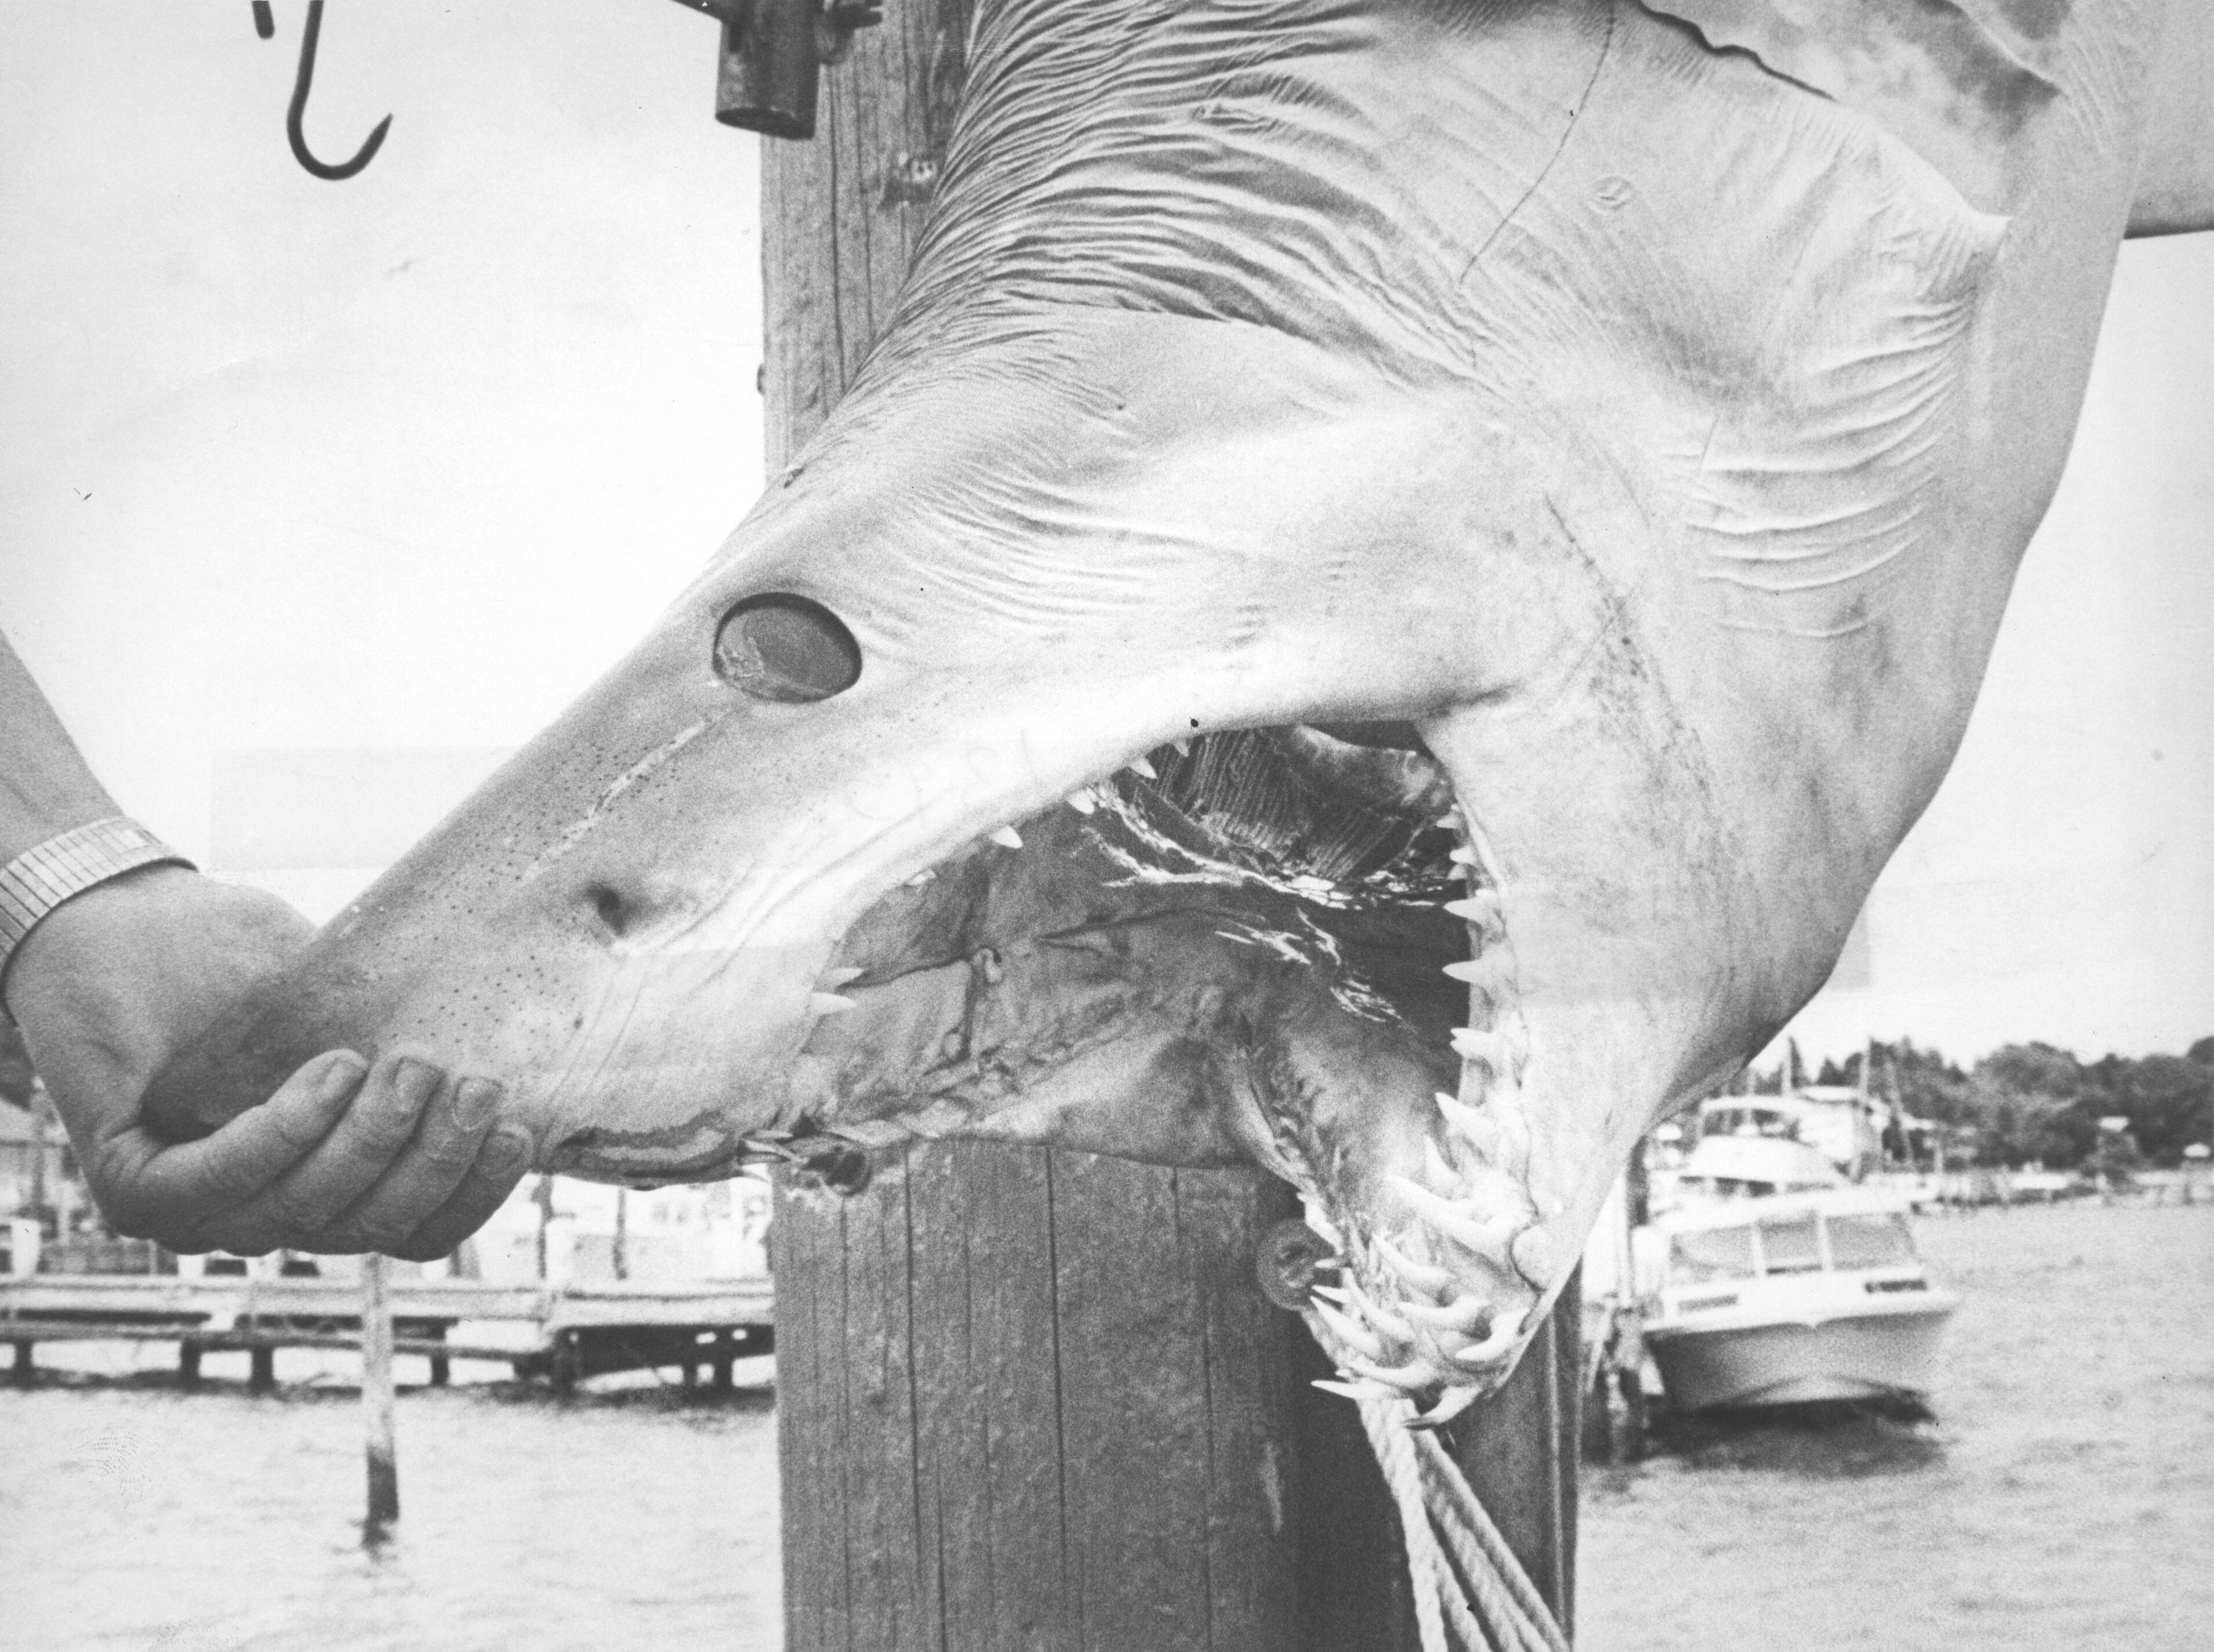 (JULY 15, 1979) Had Frank and Maryann Janusz of Rahway paid the $75 entry fee and registered in the Jersey Coast Shark Anglers mako shark tournament out of Hoffman's Anchorage in Brielle, they would have won the top prize of nearly $1,000 for having hooked this mean-looking giant. It weighed 362 pounds, nearly 30 pounds more than the tournament's big winner, and was caught about 30 miles off Manasquan during the shark-fishing contest that drew 114 registered boats.